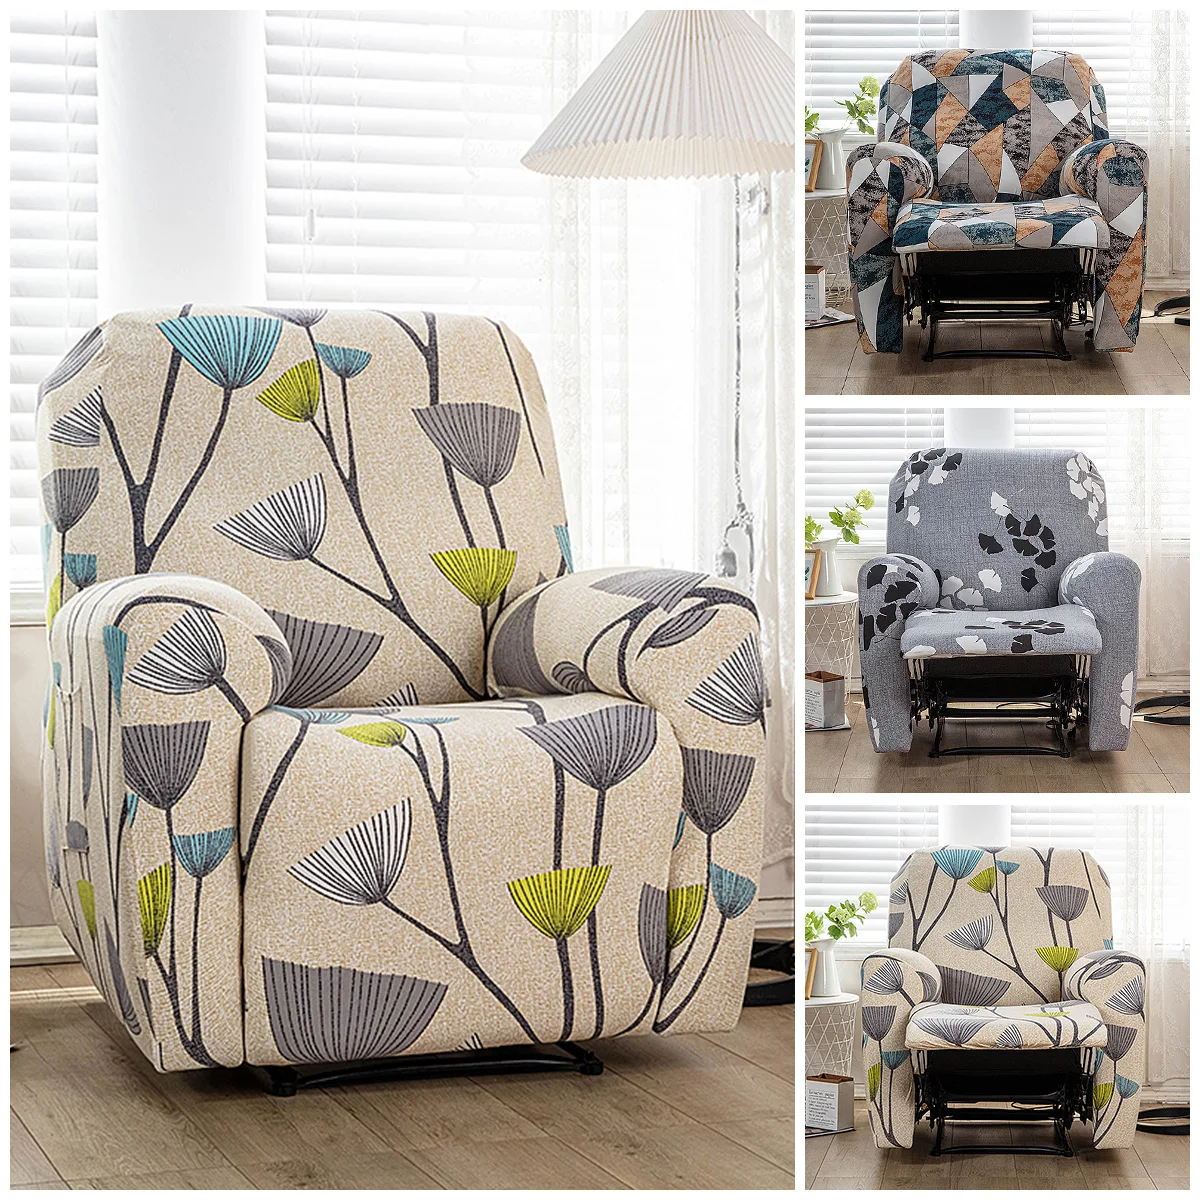 

NEW Recliner Slipcover Stretch Soft Non-slip Reclining Chair Cover Fashion Single Seat Sofa Couch Cover Decorative Furniture